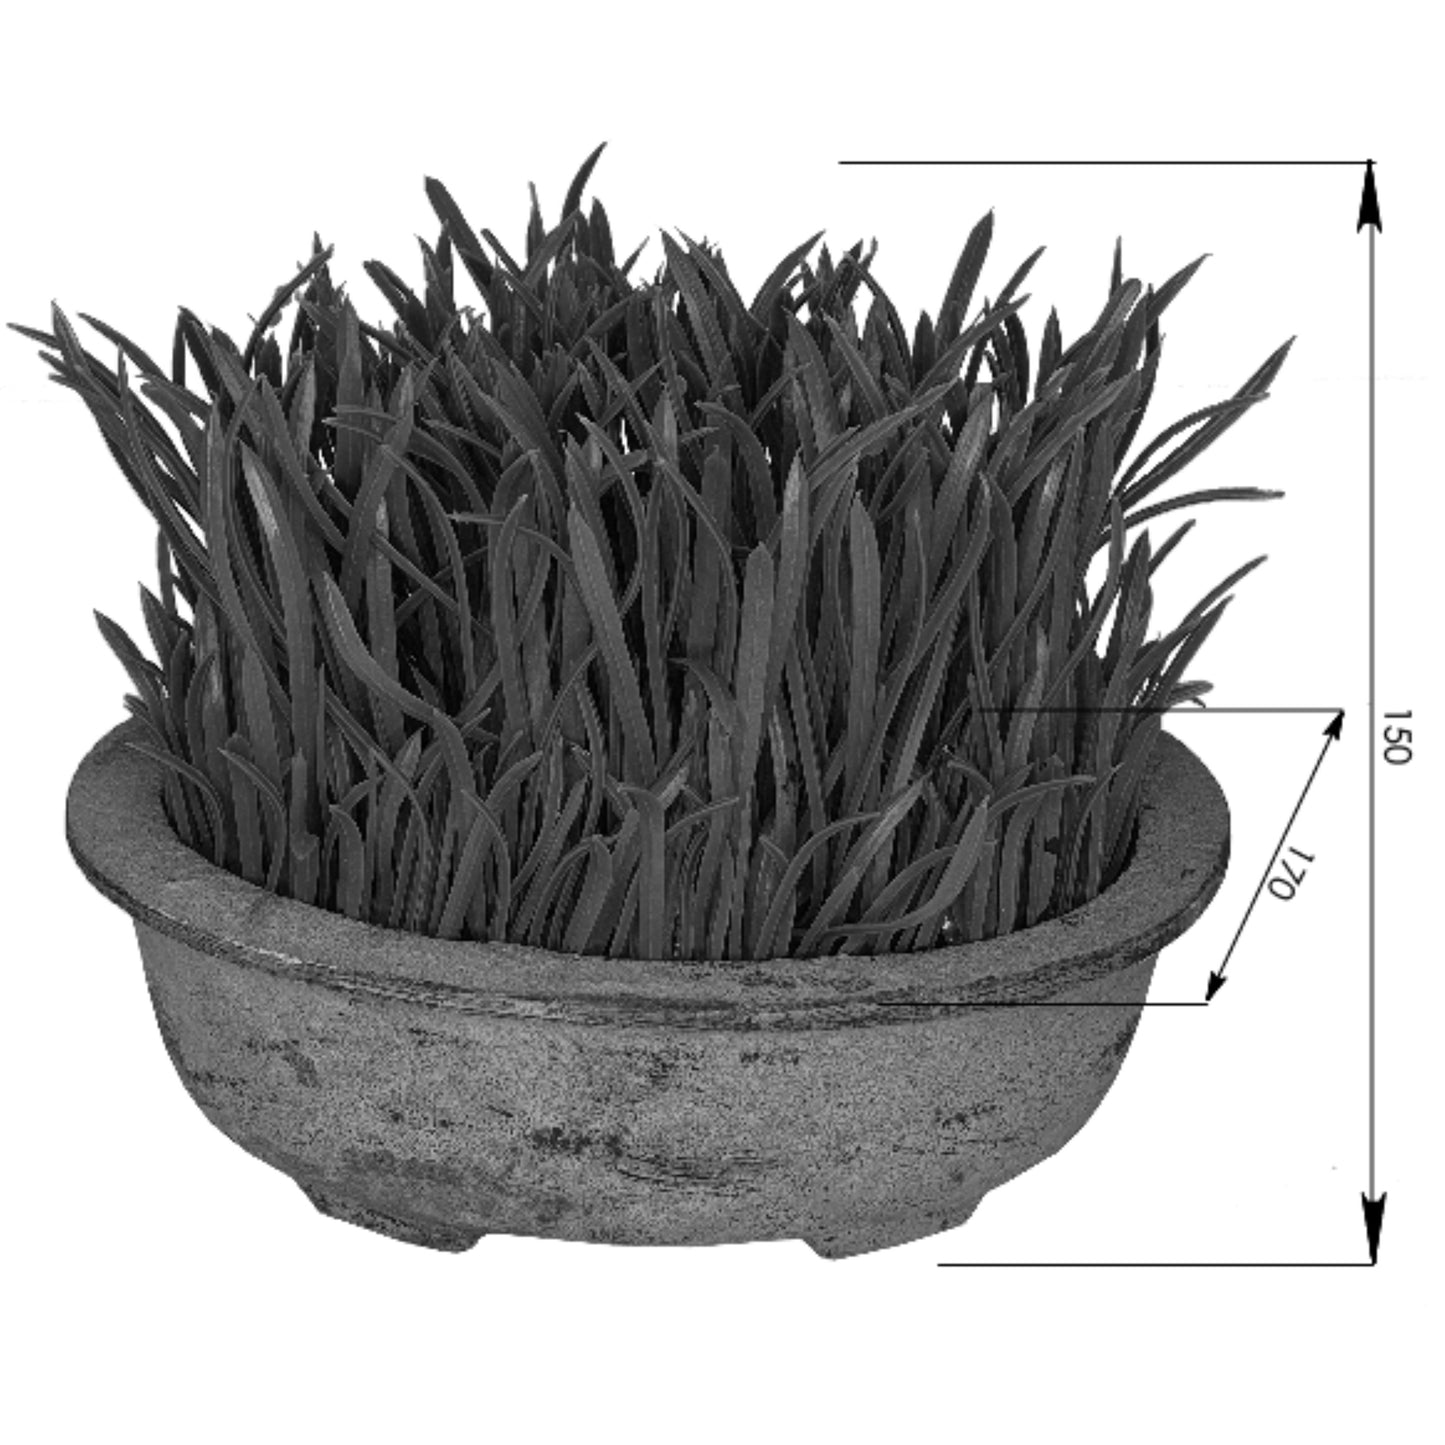 Criterion Artificial Potted Grass Plant (medium) 190mm